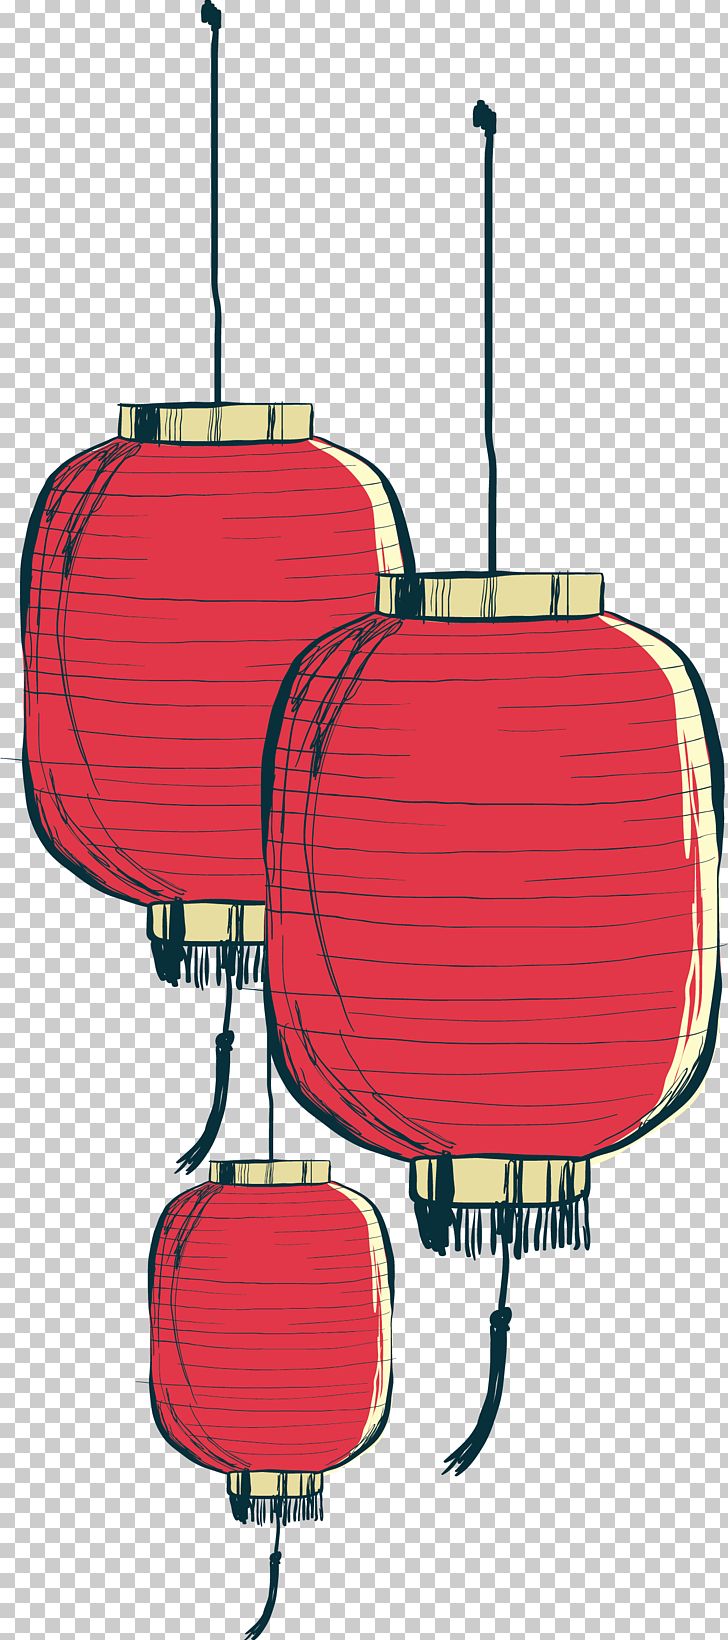 Paper Lantern PNG, Clipart, Antique Lantern, China, Chinese Style, Decorative Patterns, Design Free PNG Download